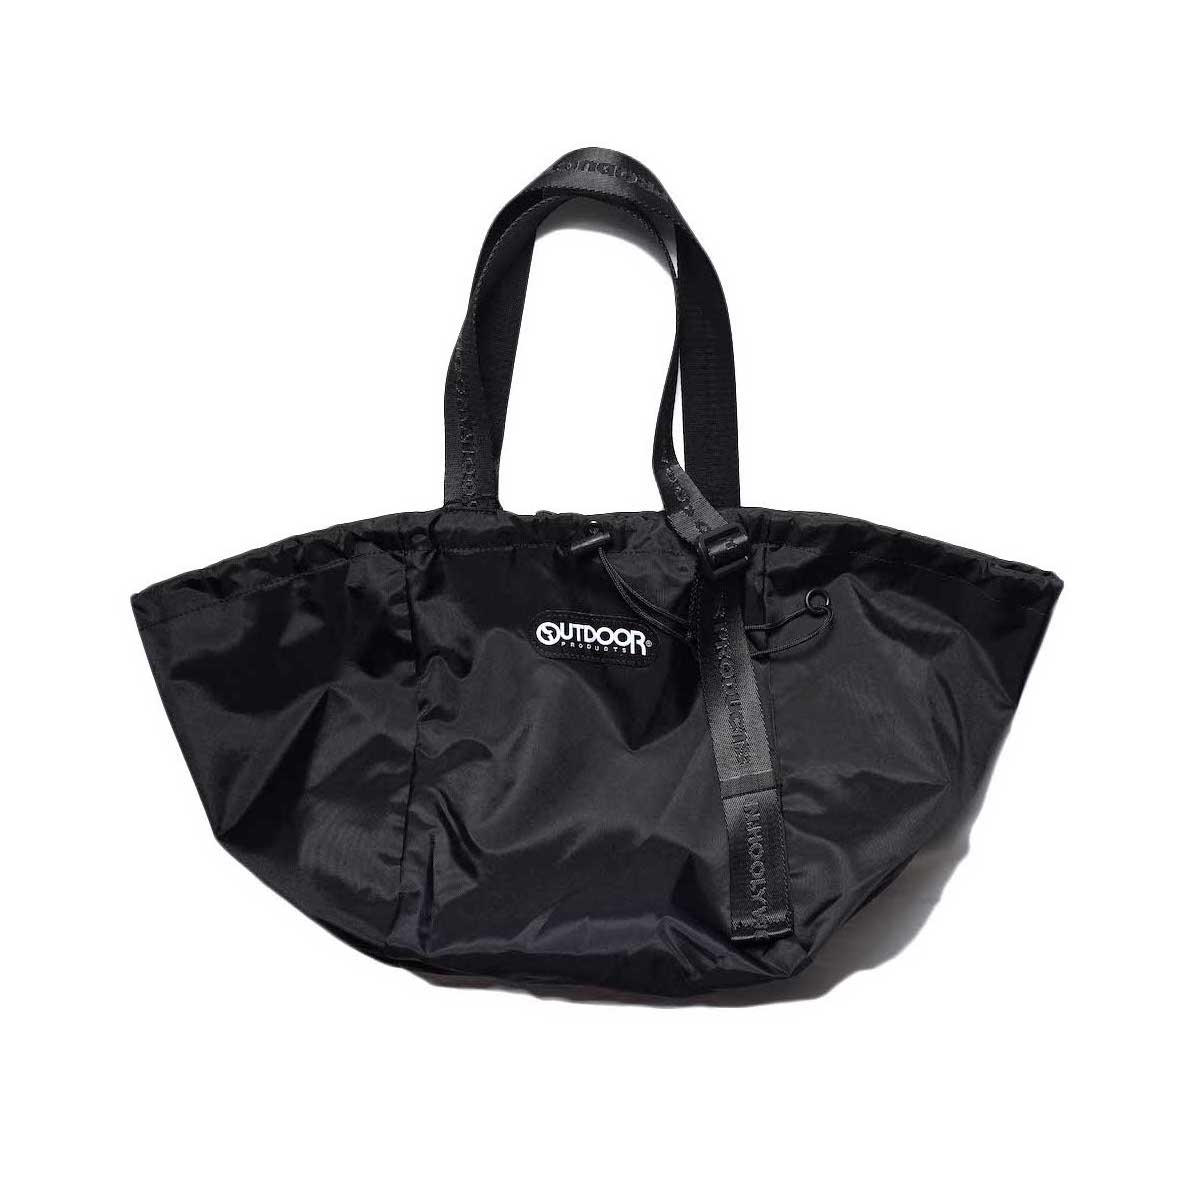 N.HOOLYWOOD / N.HOOLYWOOD COMPILE × OUTDOOR PRODUCTS TOTE BAG (Black)